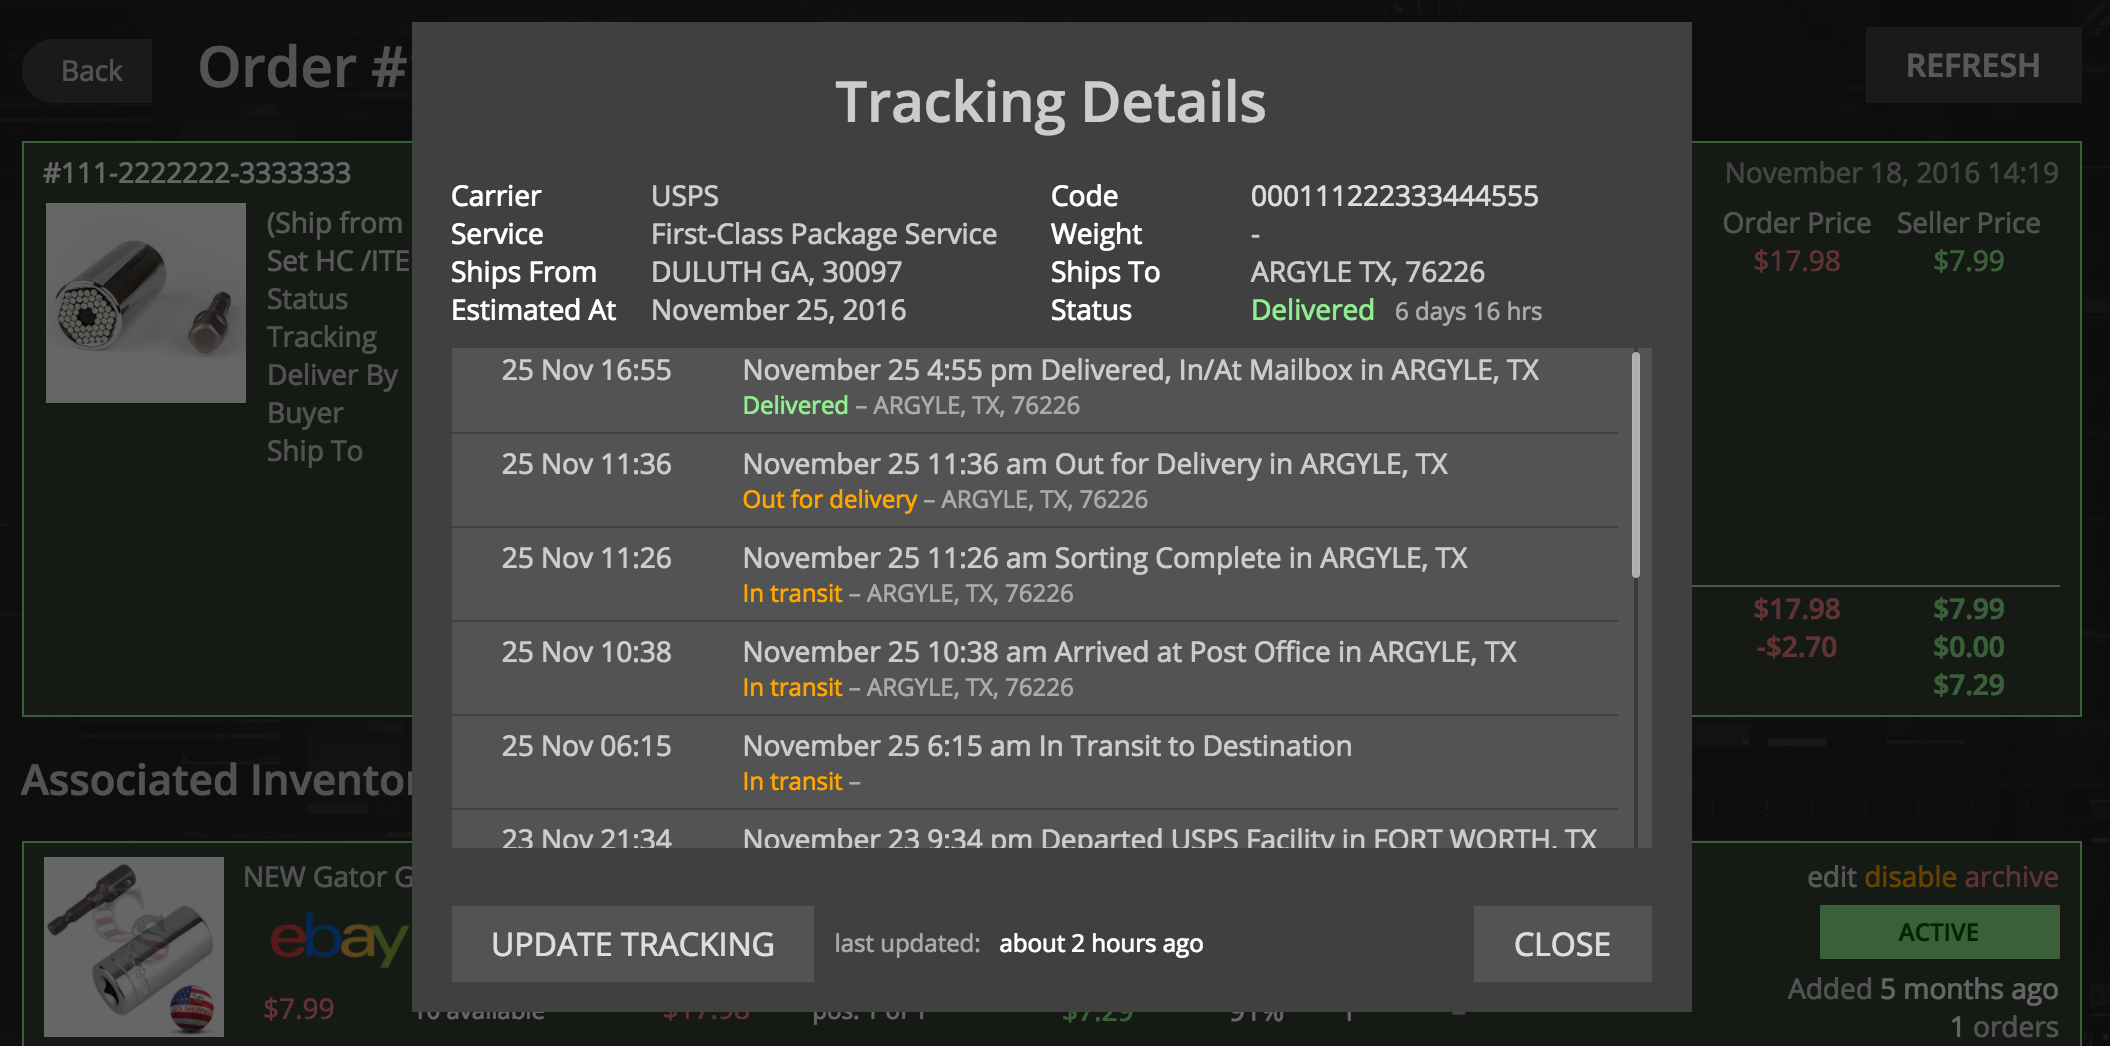 Tracking details